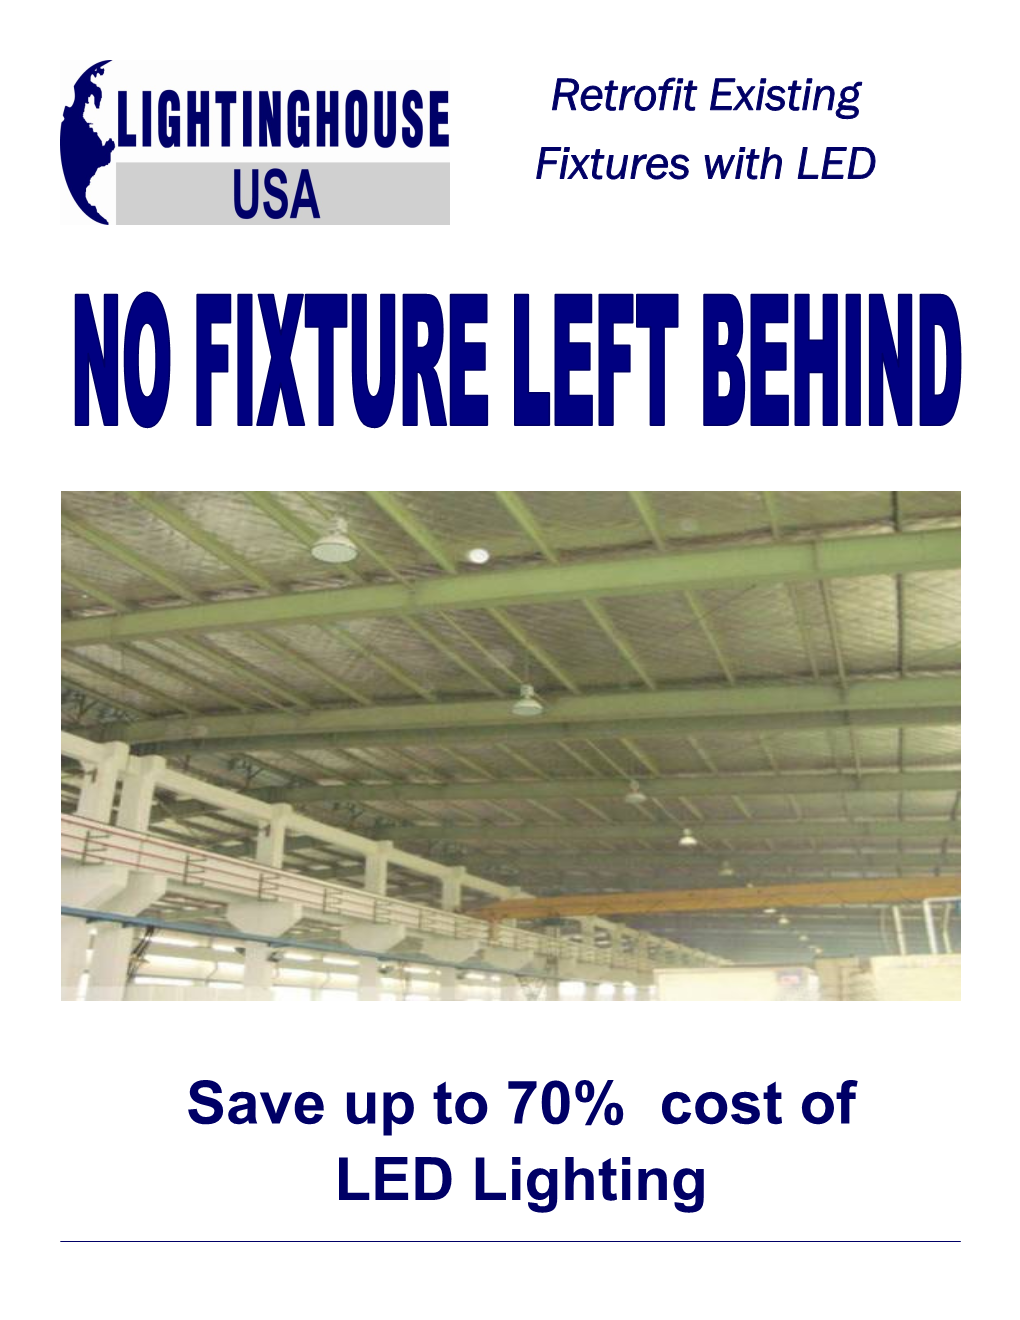 Save up to 70% Cost of LED Lighting LED Retrofit Series